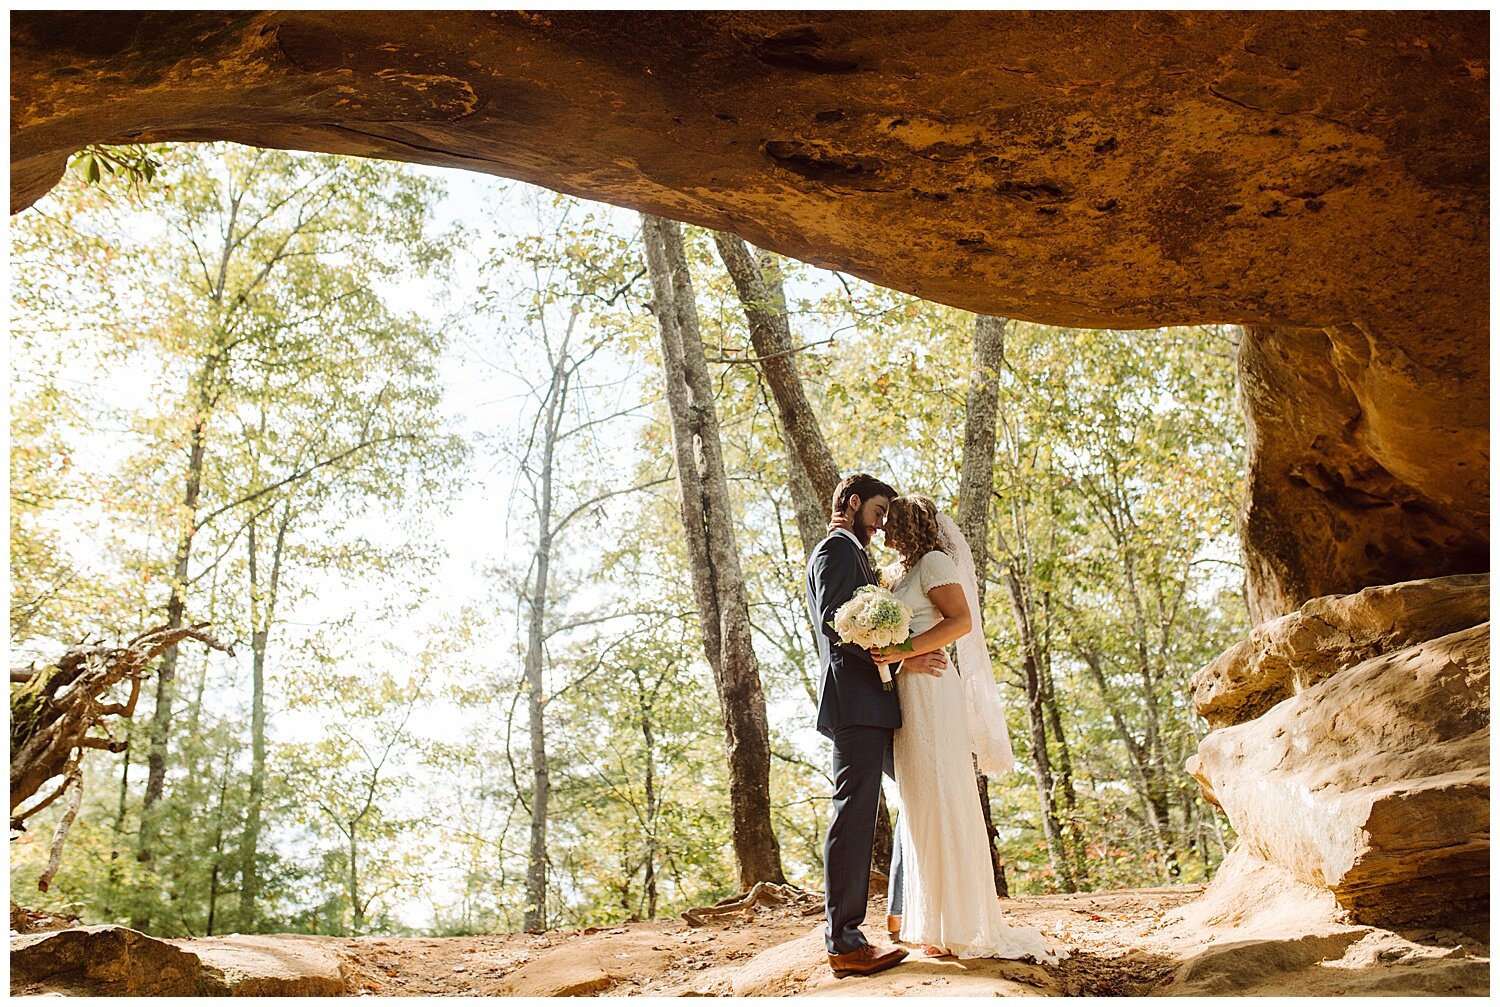 trent.and.kendra.photography.red.river.gorge.elopement.wedding-22.jpg